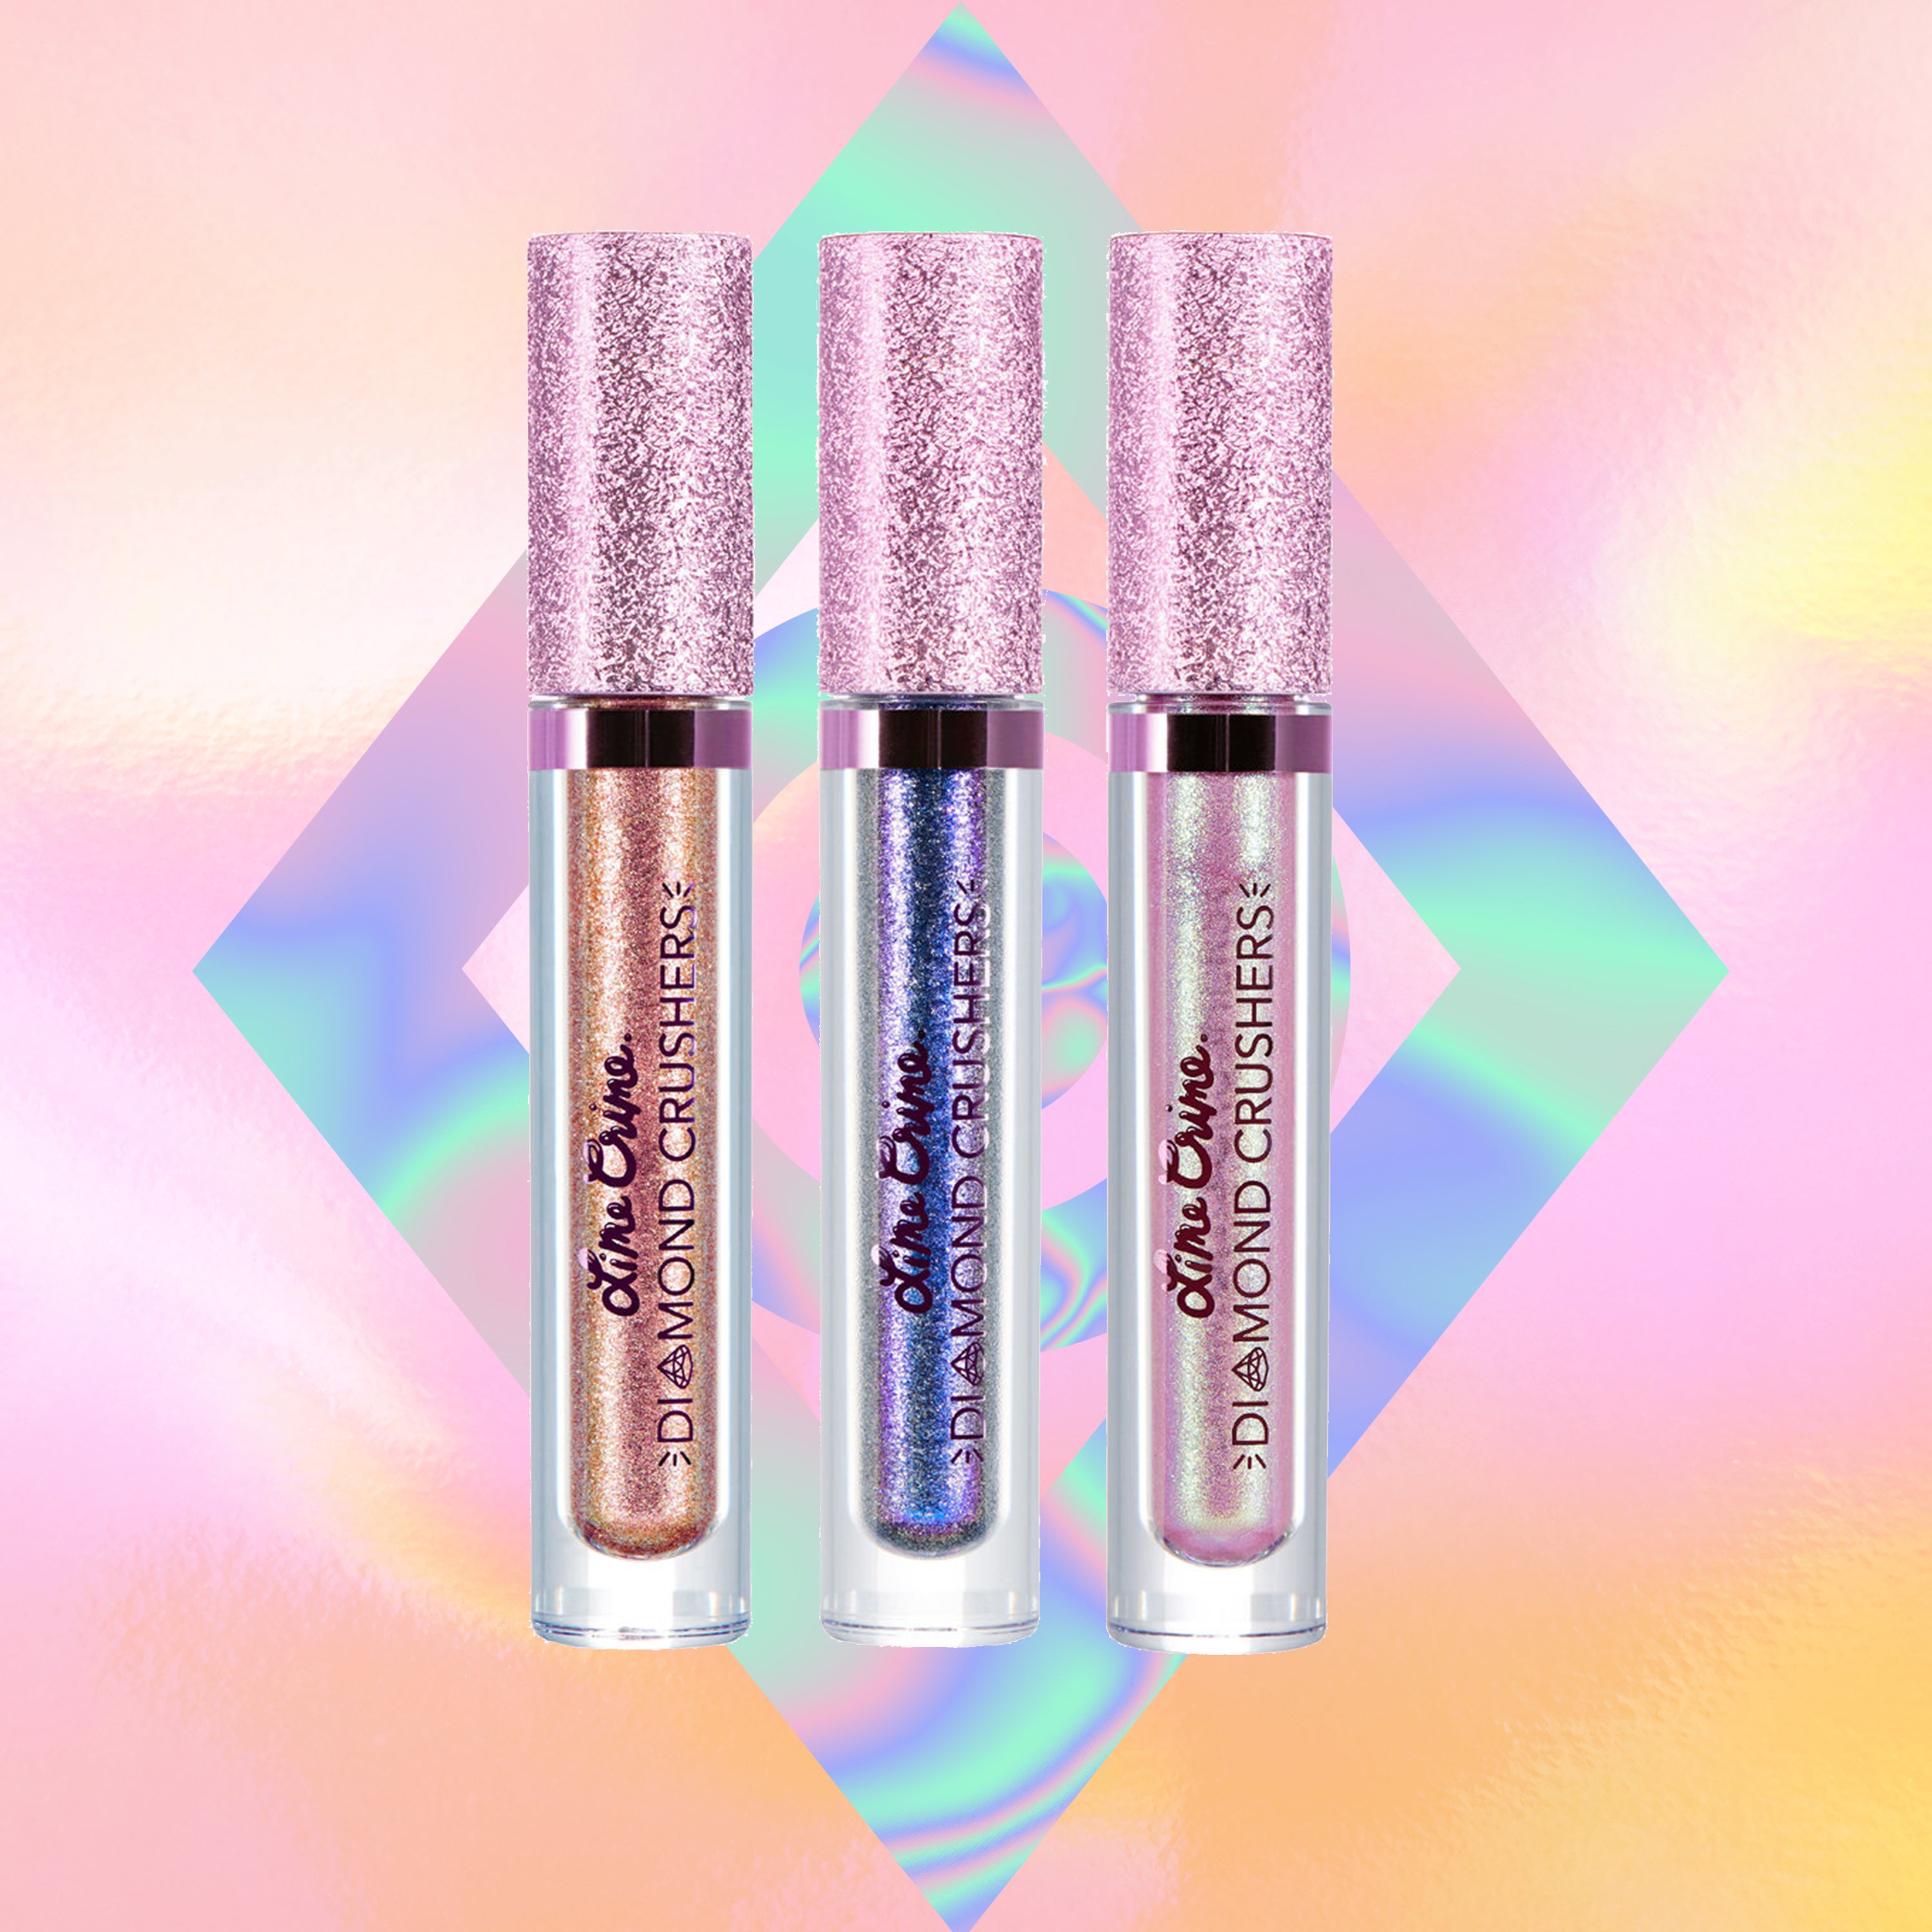 15 Holographic Makeup Products You Need For An Otherworldly Glow
